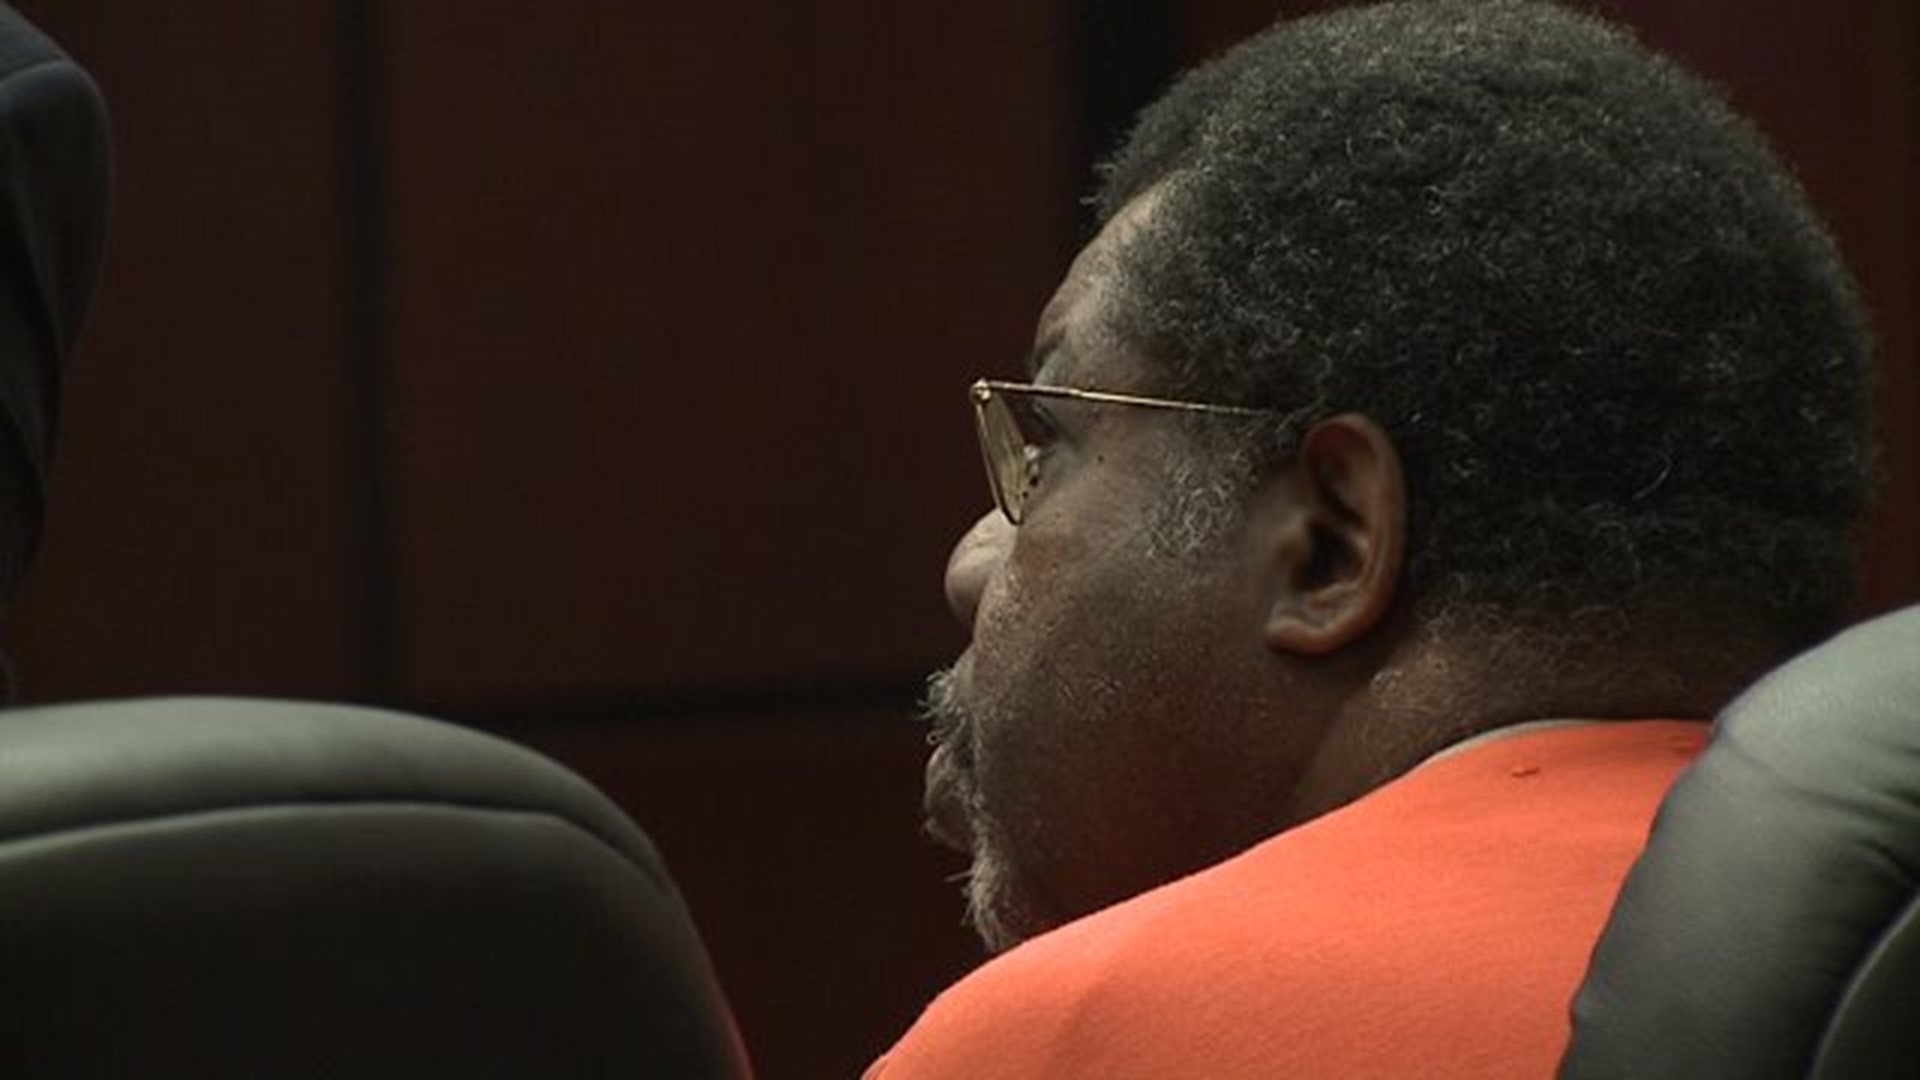 Dr. Norman Williams sentenced to 12 years